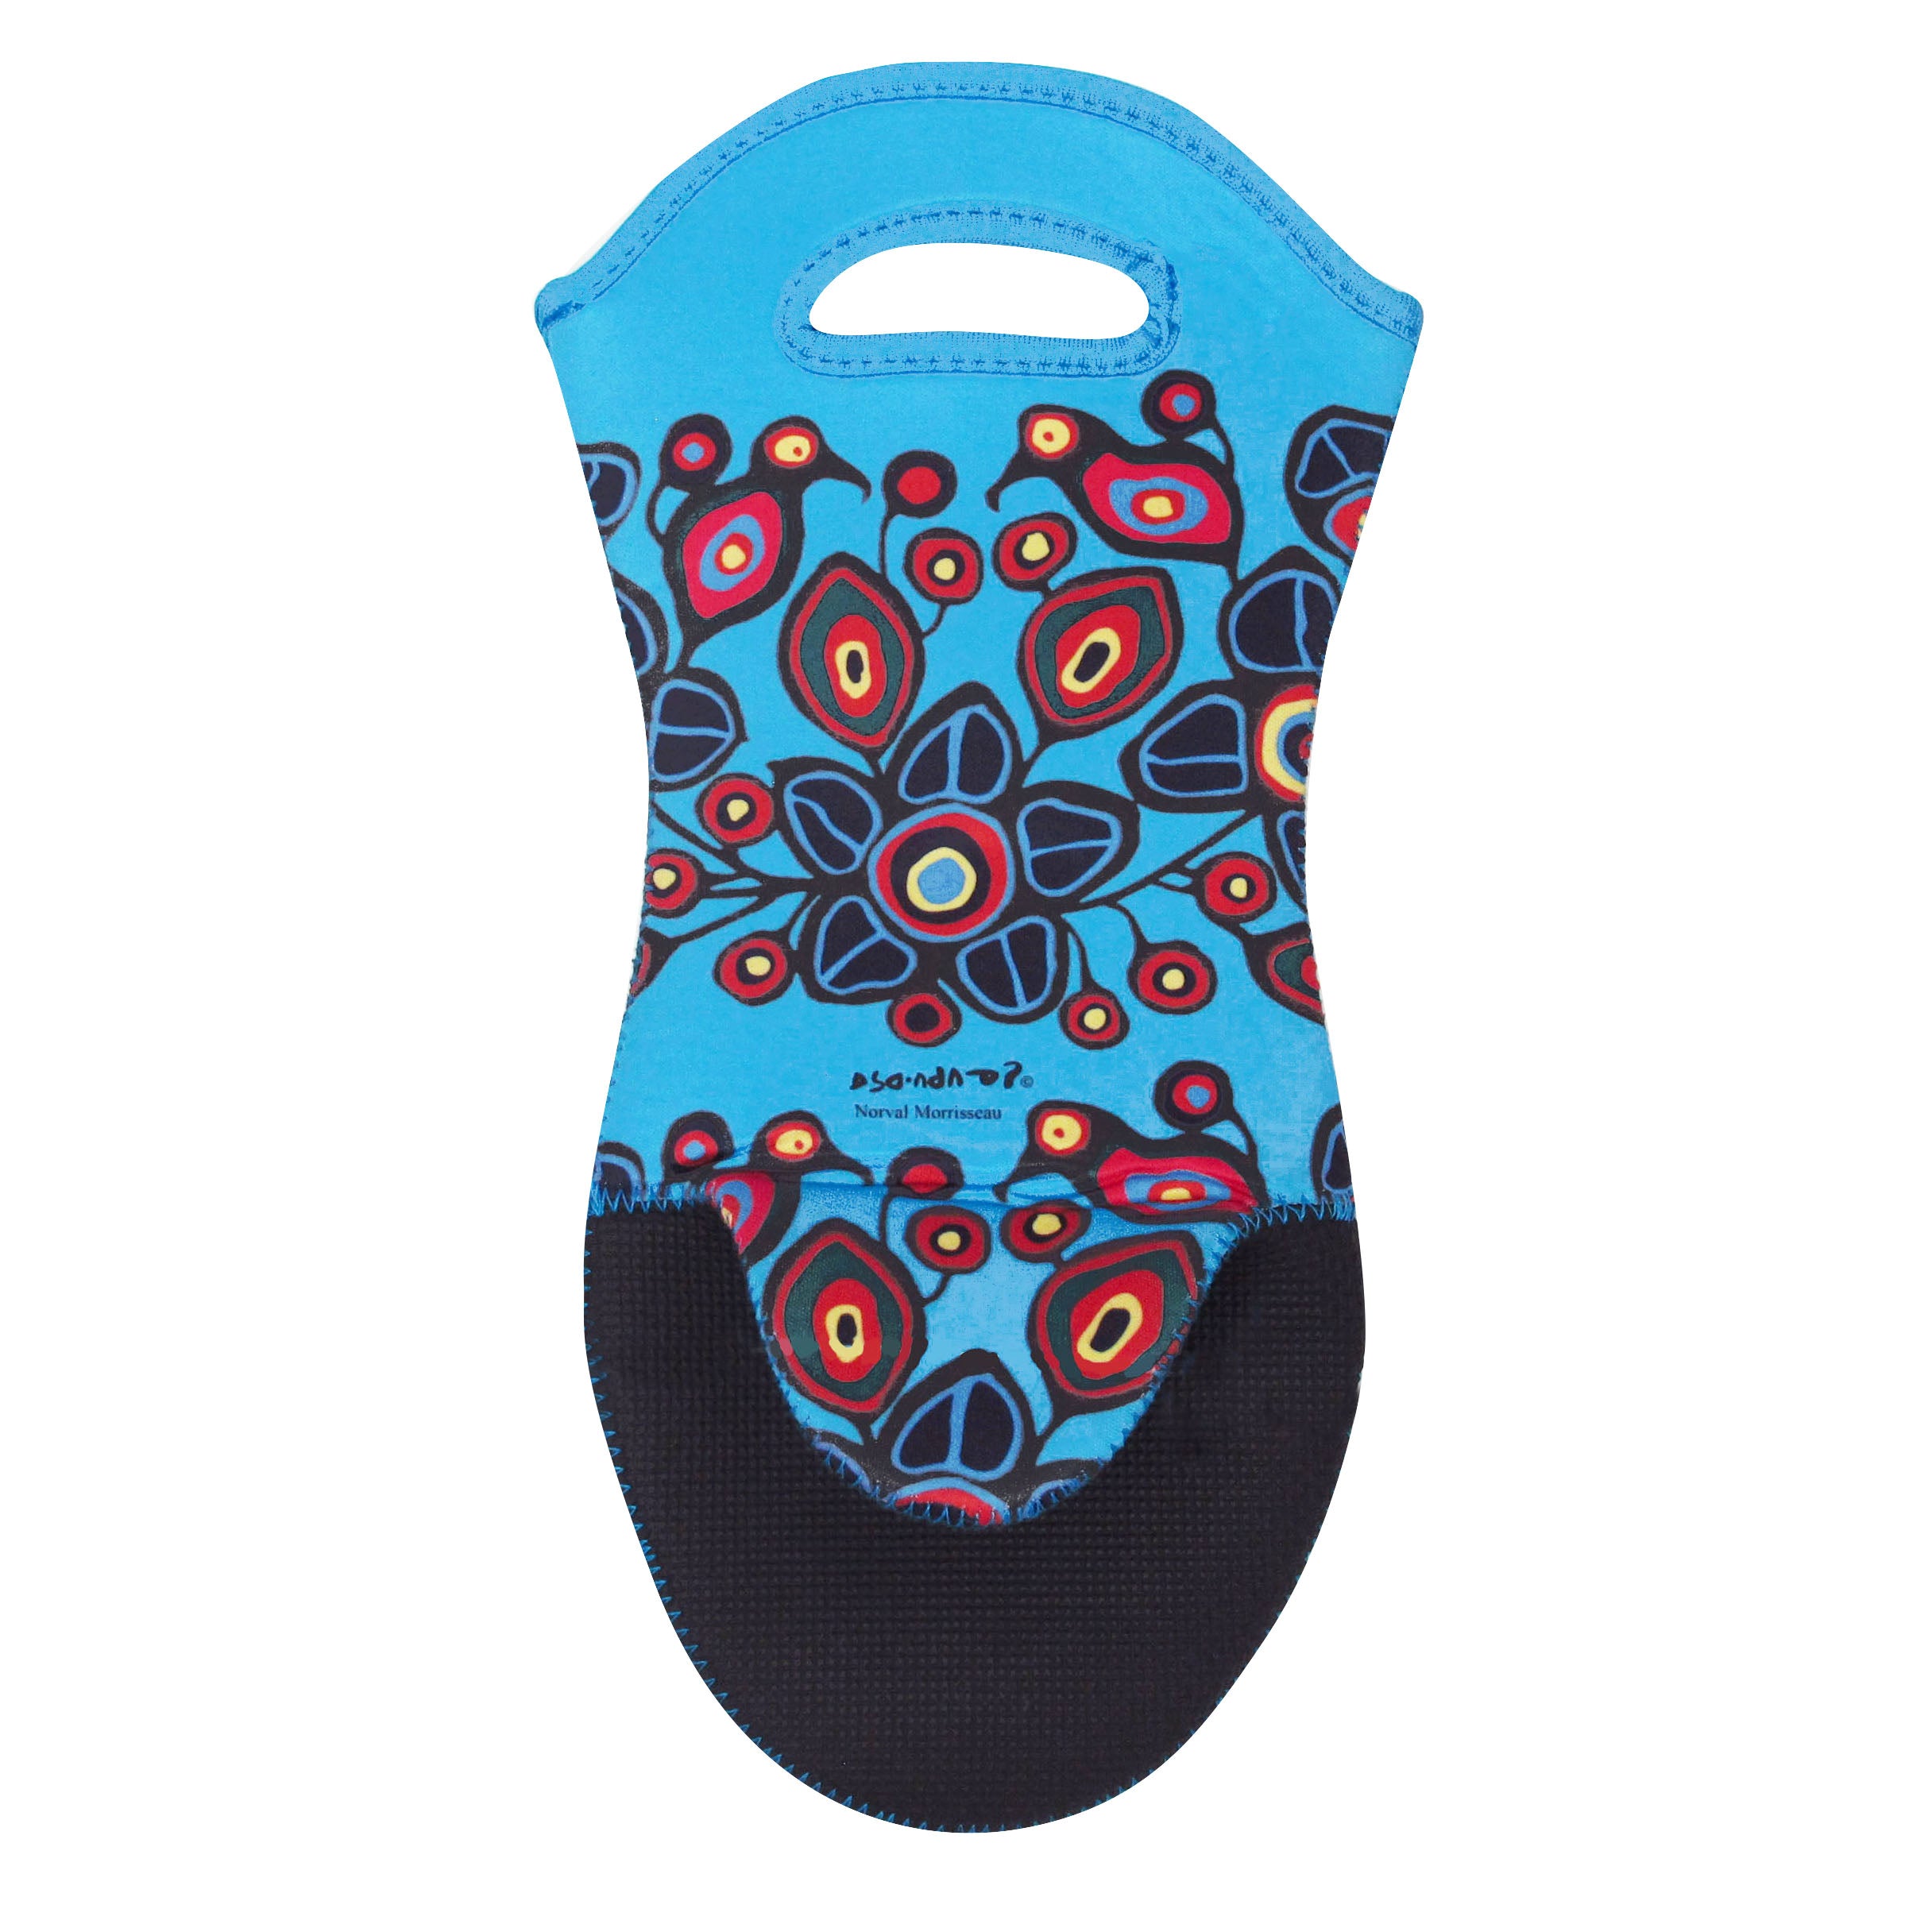 Norval Morrisseau Flowers and Birds Oven Mitt